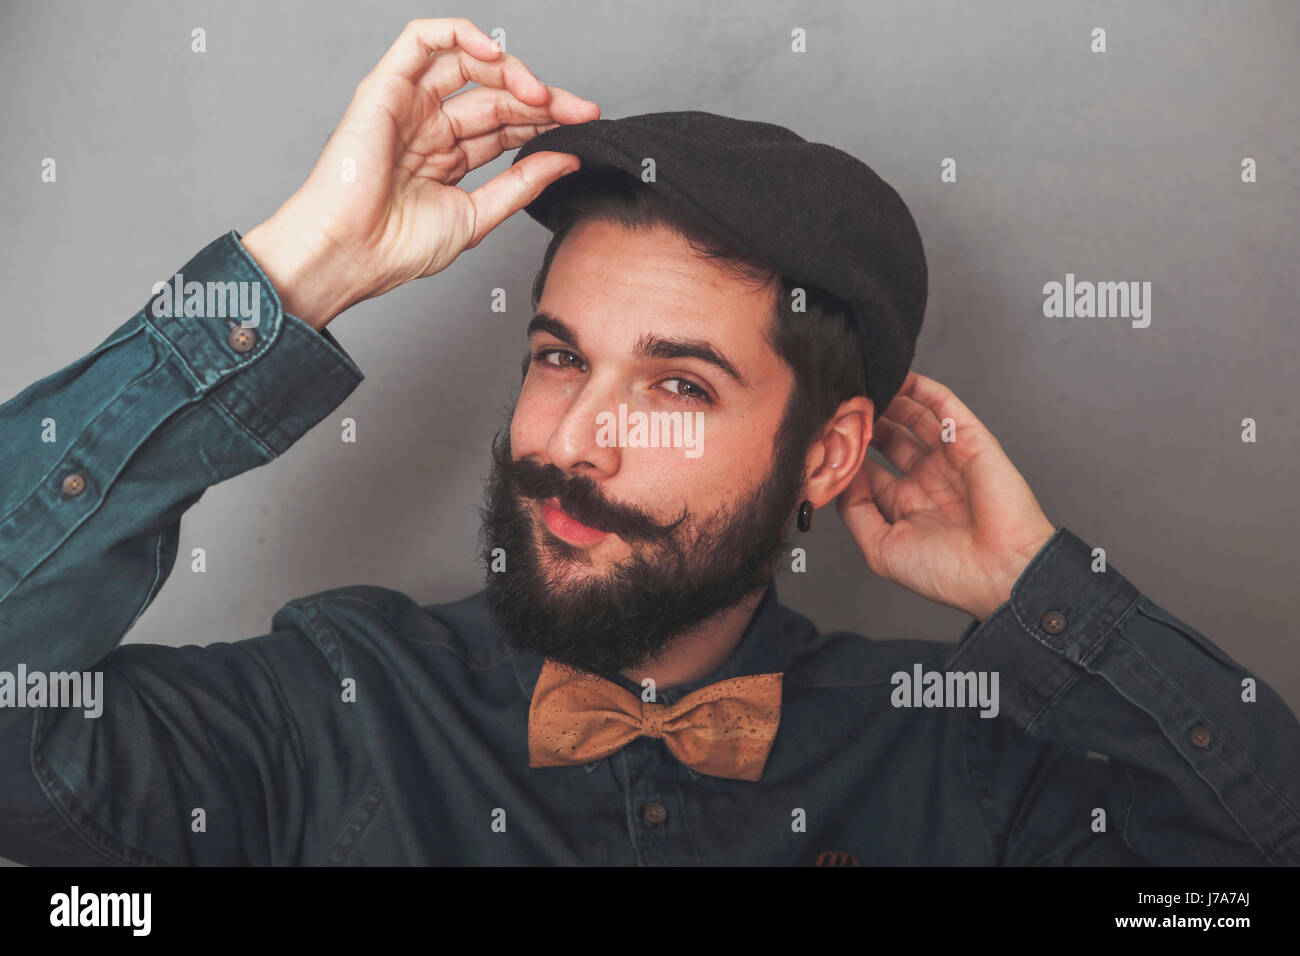 Bearded man putting on his cap, wearing denim shirt and cork bow tie Stock Photo